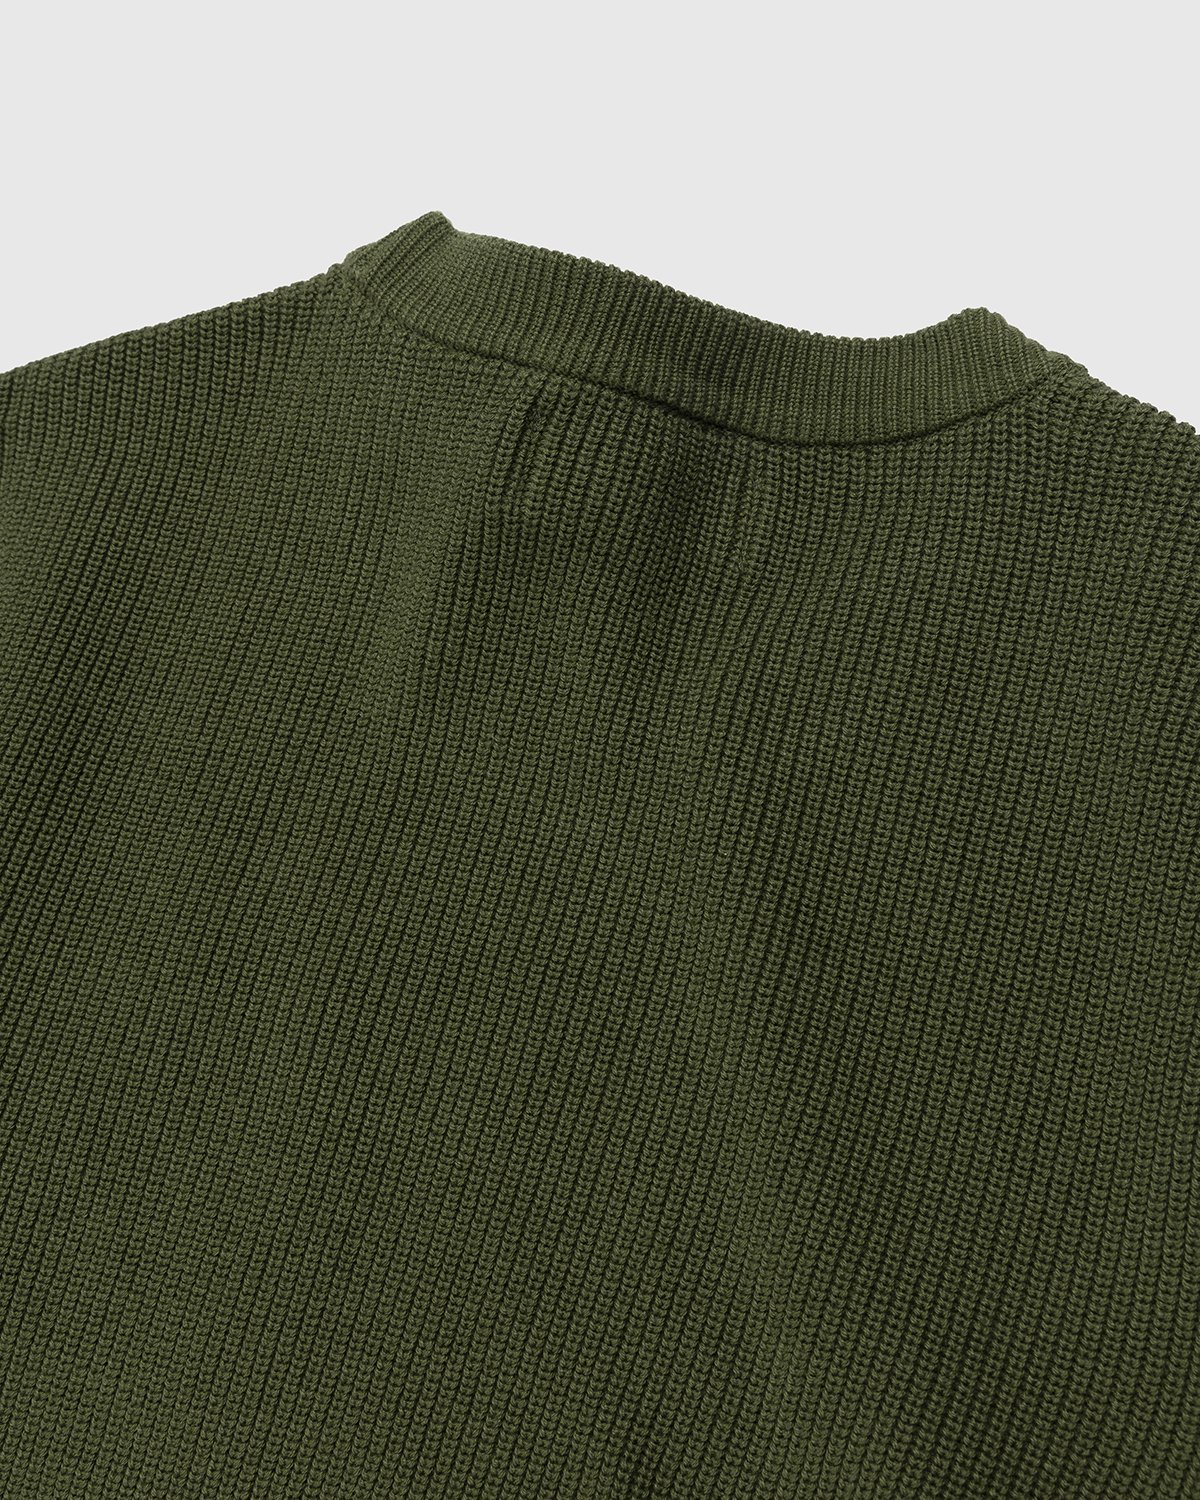 Stone Island - 550D8 Ribbed Soft Cotton Knit Olive - Clothing - Green - Image 3